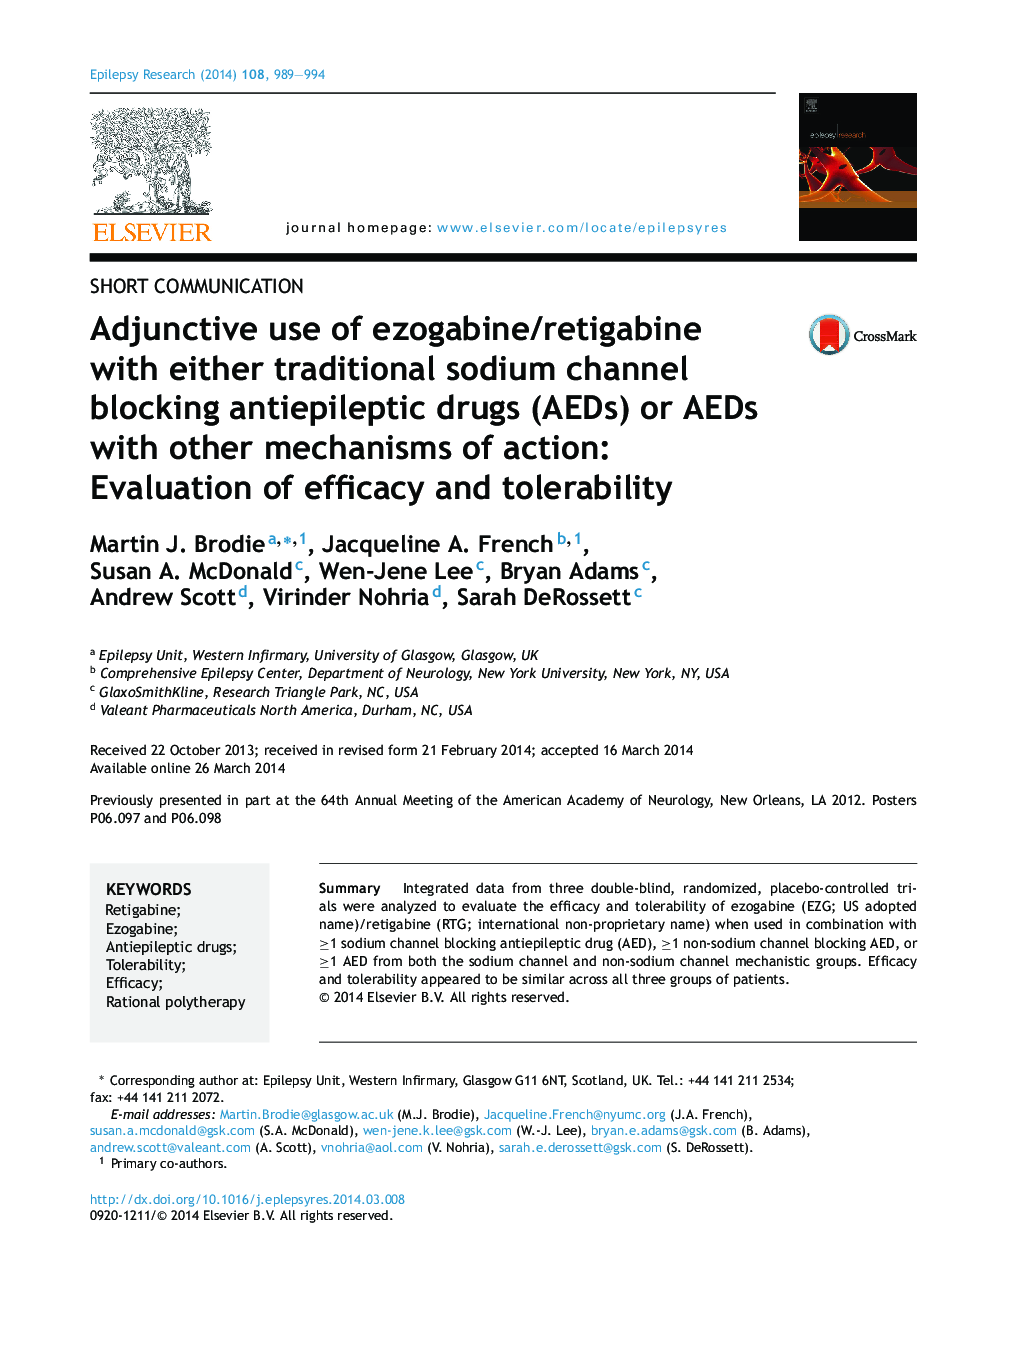 Short communicationAdjunctive use of ezogabine/retigabine with either traditional sodium channel blocking antiepileptic drugs (AEDs) or AEDs with other mechanisms of action: Evaluation of efficacy and tolerability